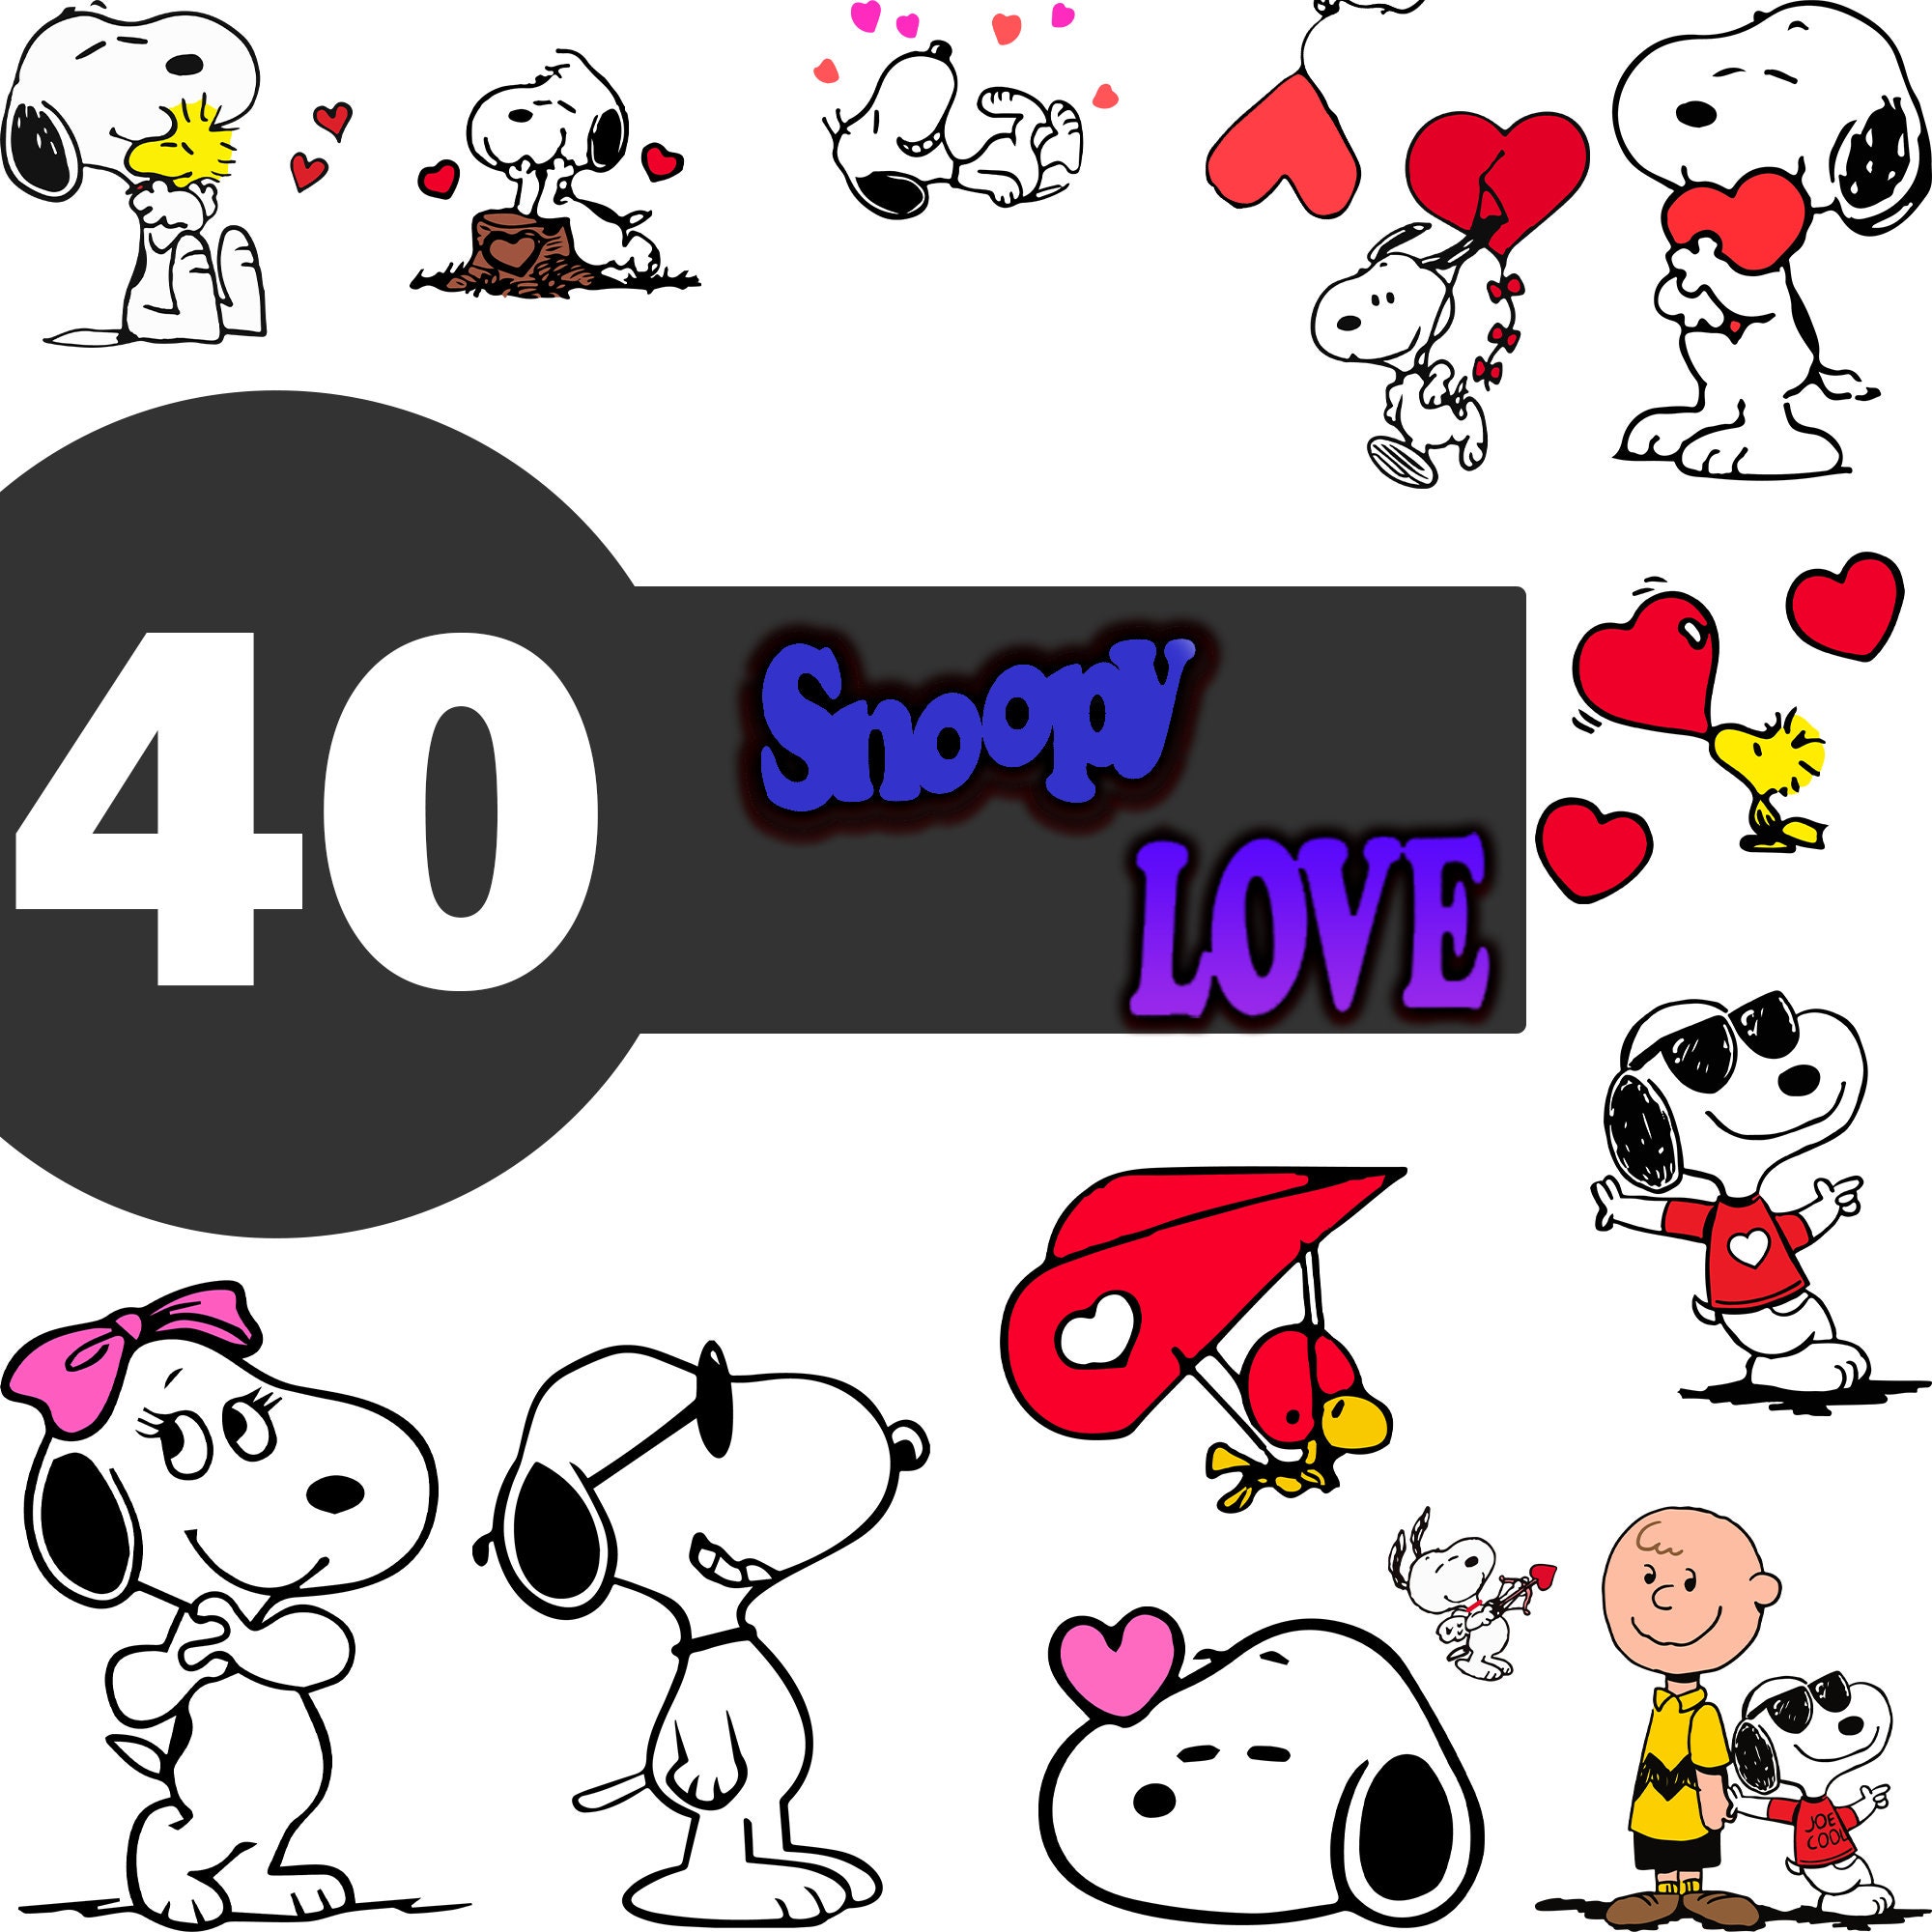 Stickers for Sale  Snoopy tattoo, Snoopy wallpaper, Cute stickers